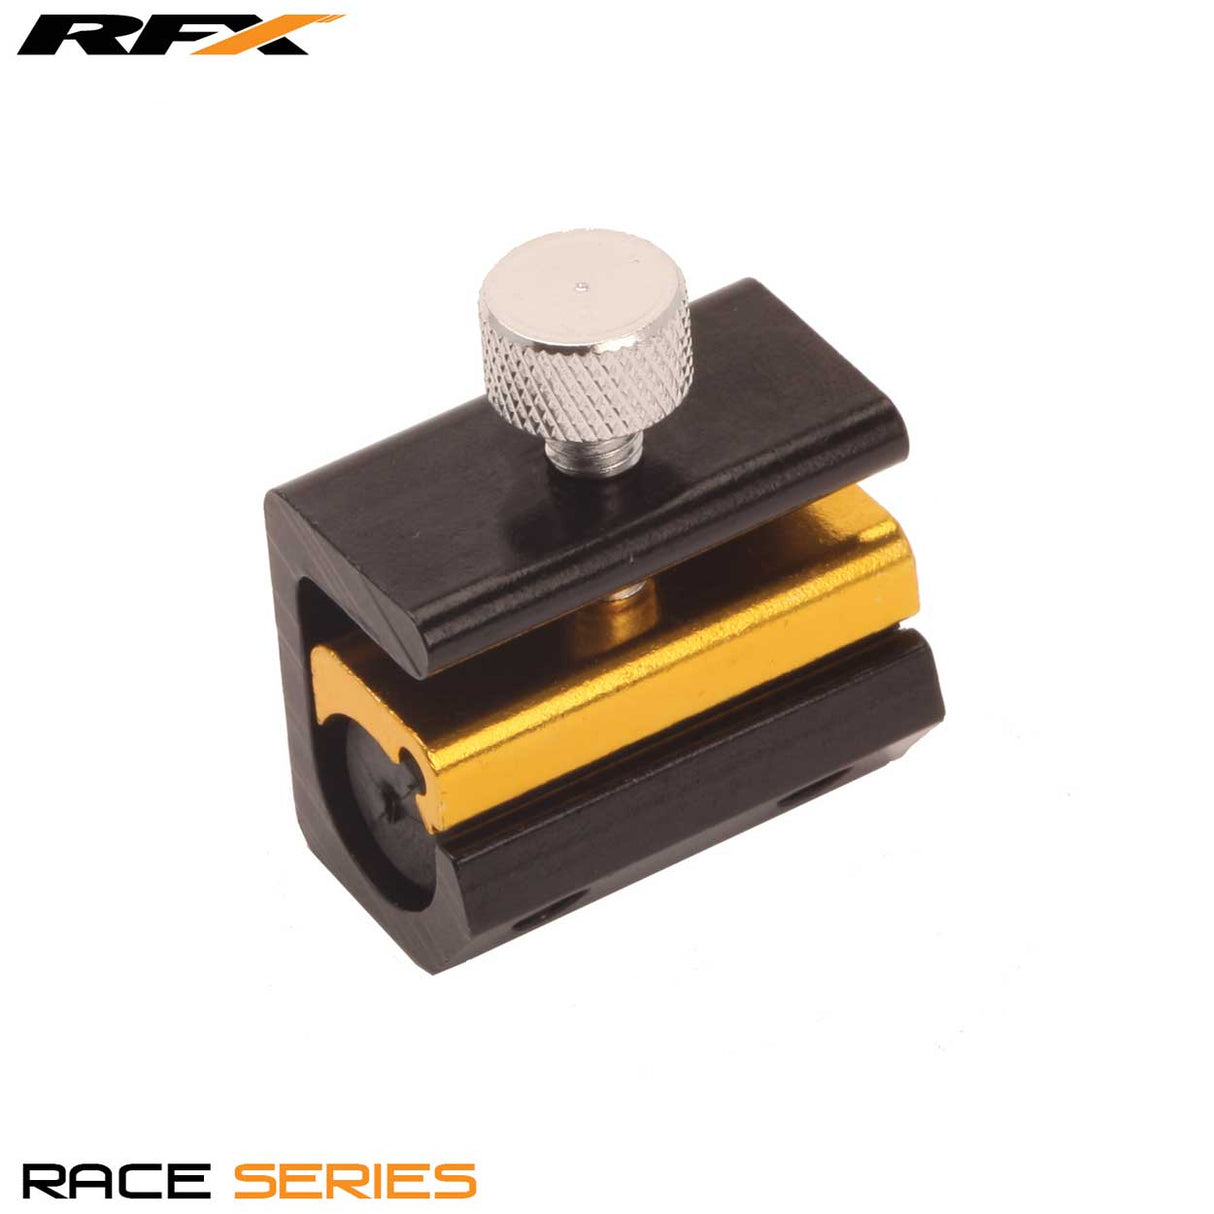 RFX Race Cable Oiler Universal to suit all Cables